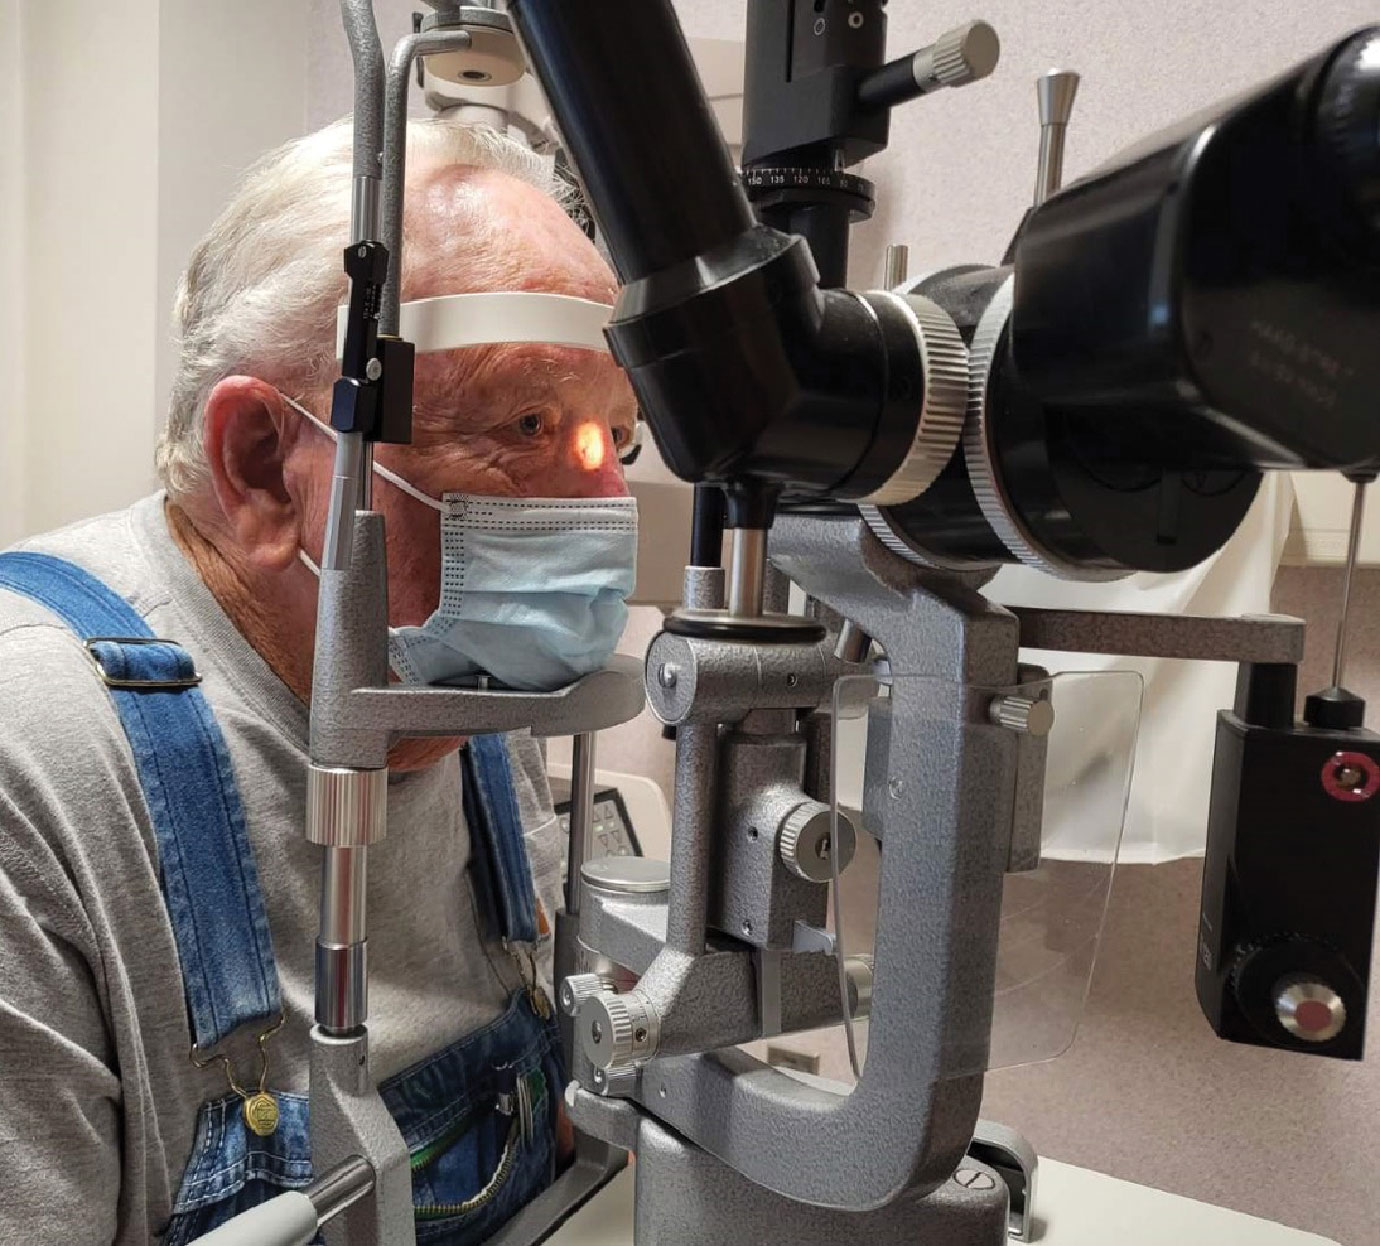 All examination-based measures of vision were significantly associated with more fragmented daily activity, which has significant implications for the well-being of older adults with impaired vision.